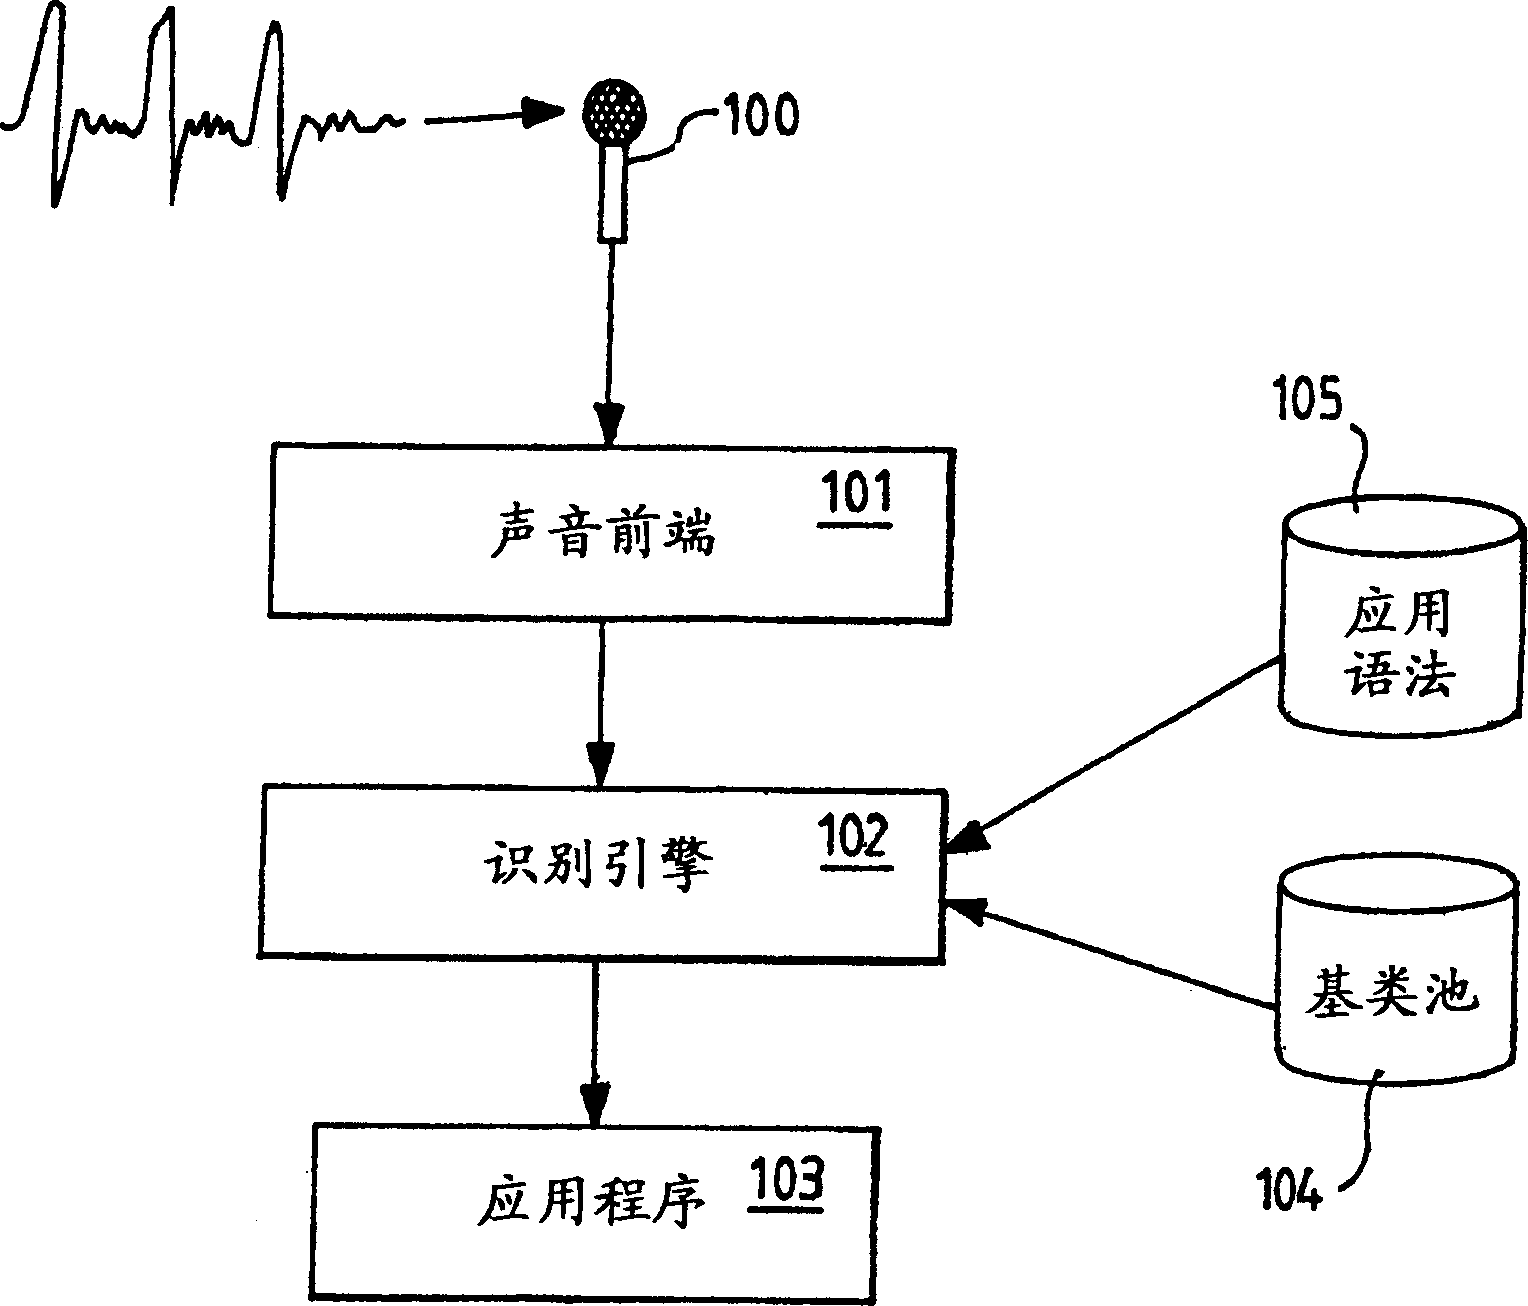 Methods and apparatus for automatic speech recognition